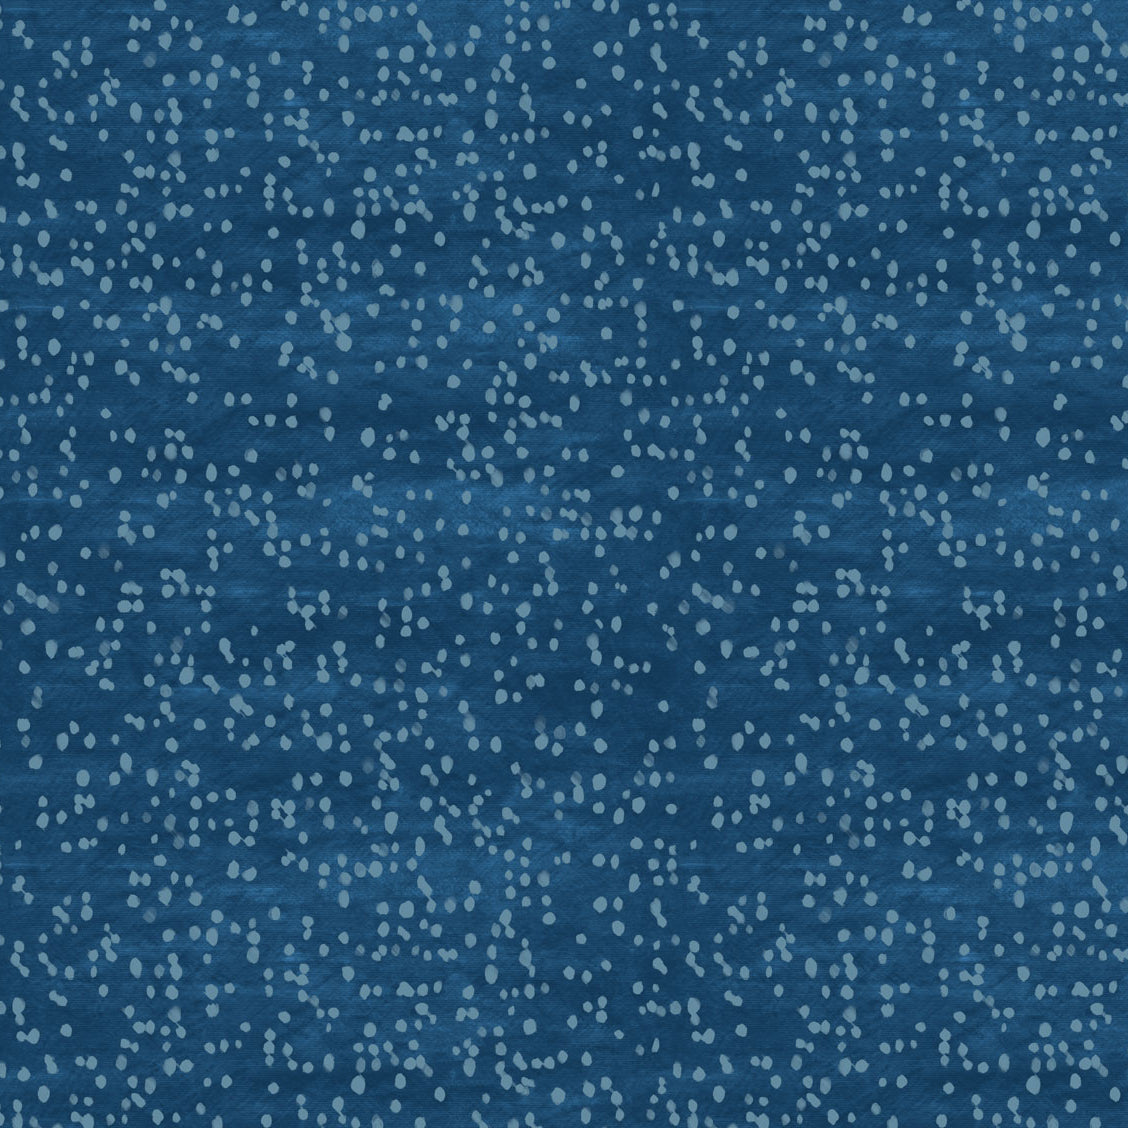 Detail of fabric in an abstract dotted pattern in blue on a mottled navy field.